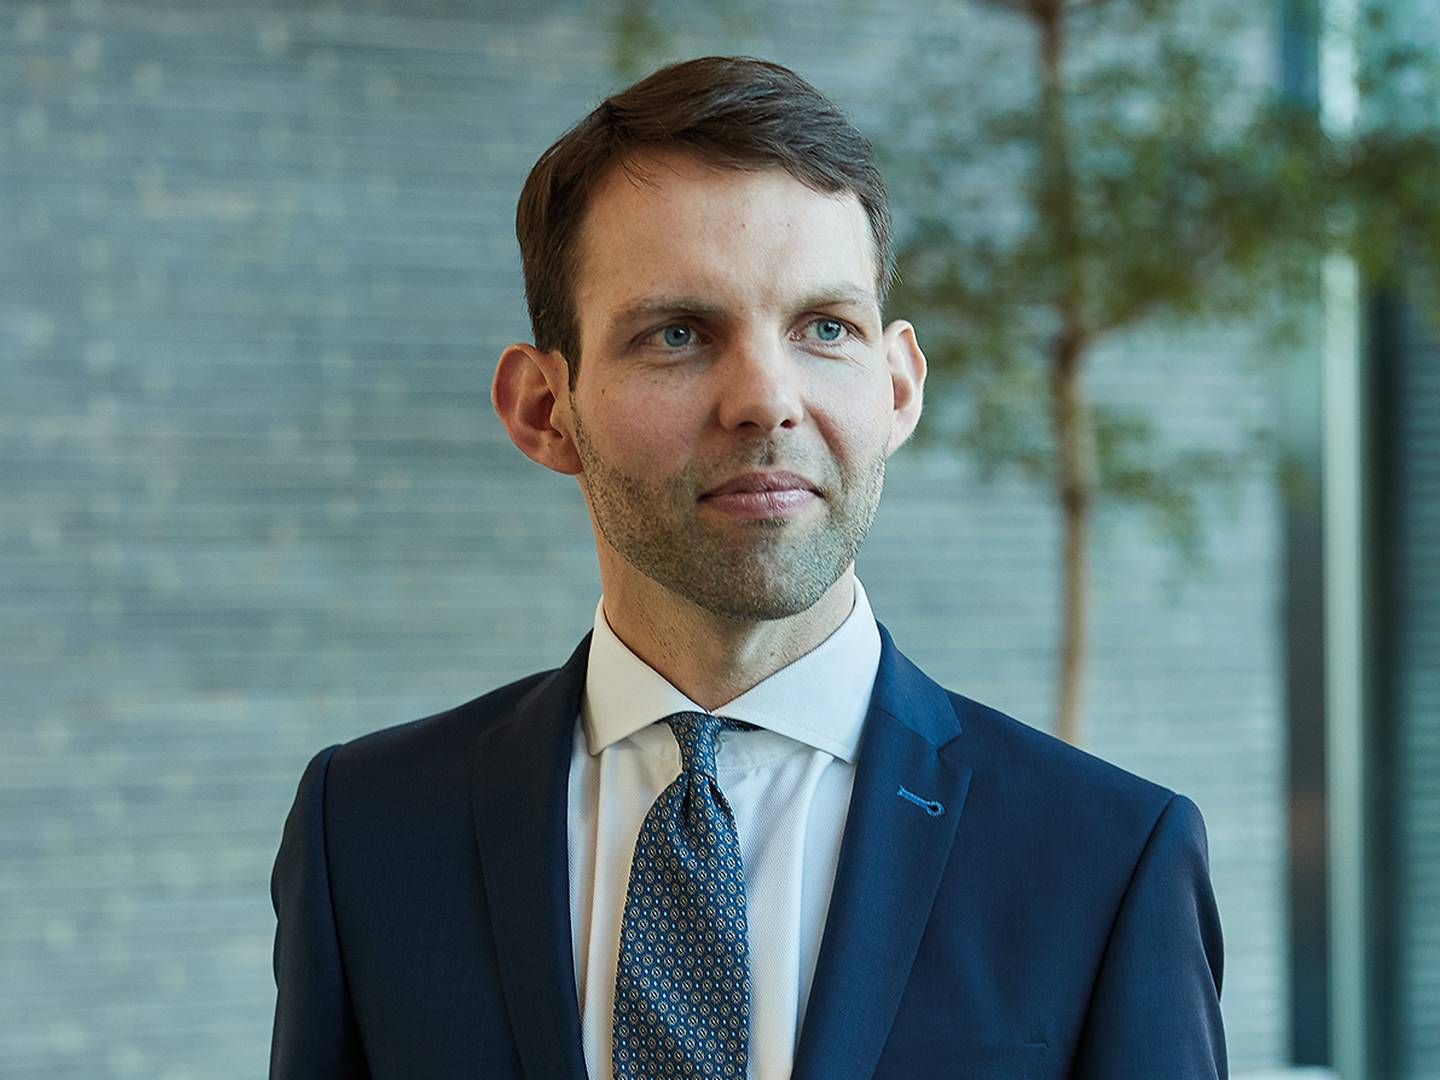 We have an ambition of creating as much value as possible while developing. Growth is more of an end than a means for what we do," says Rasmus Ravnholdt Knudsen, CFO, Monjasa. | Photo: Monjasa